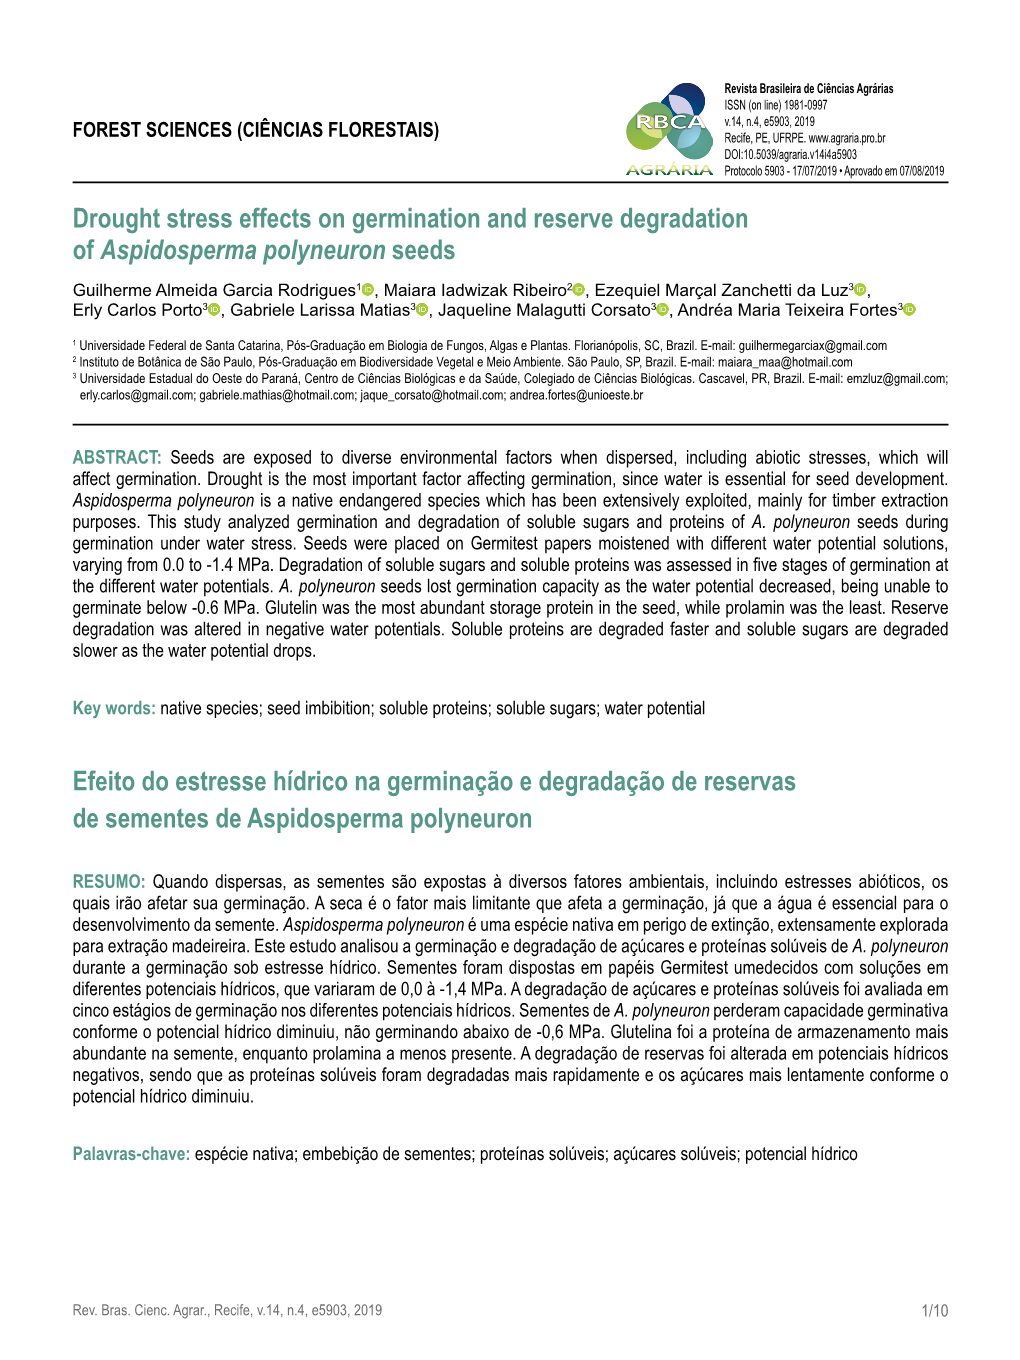 Drought Stress Effects on Germination and Reserve Degradation Of